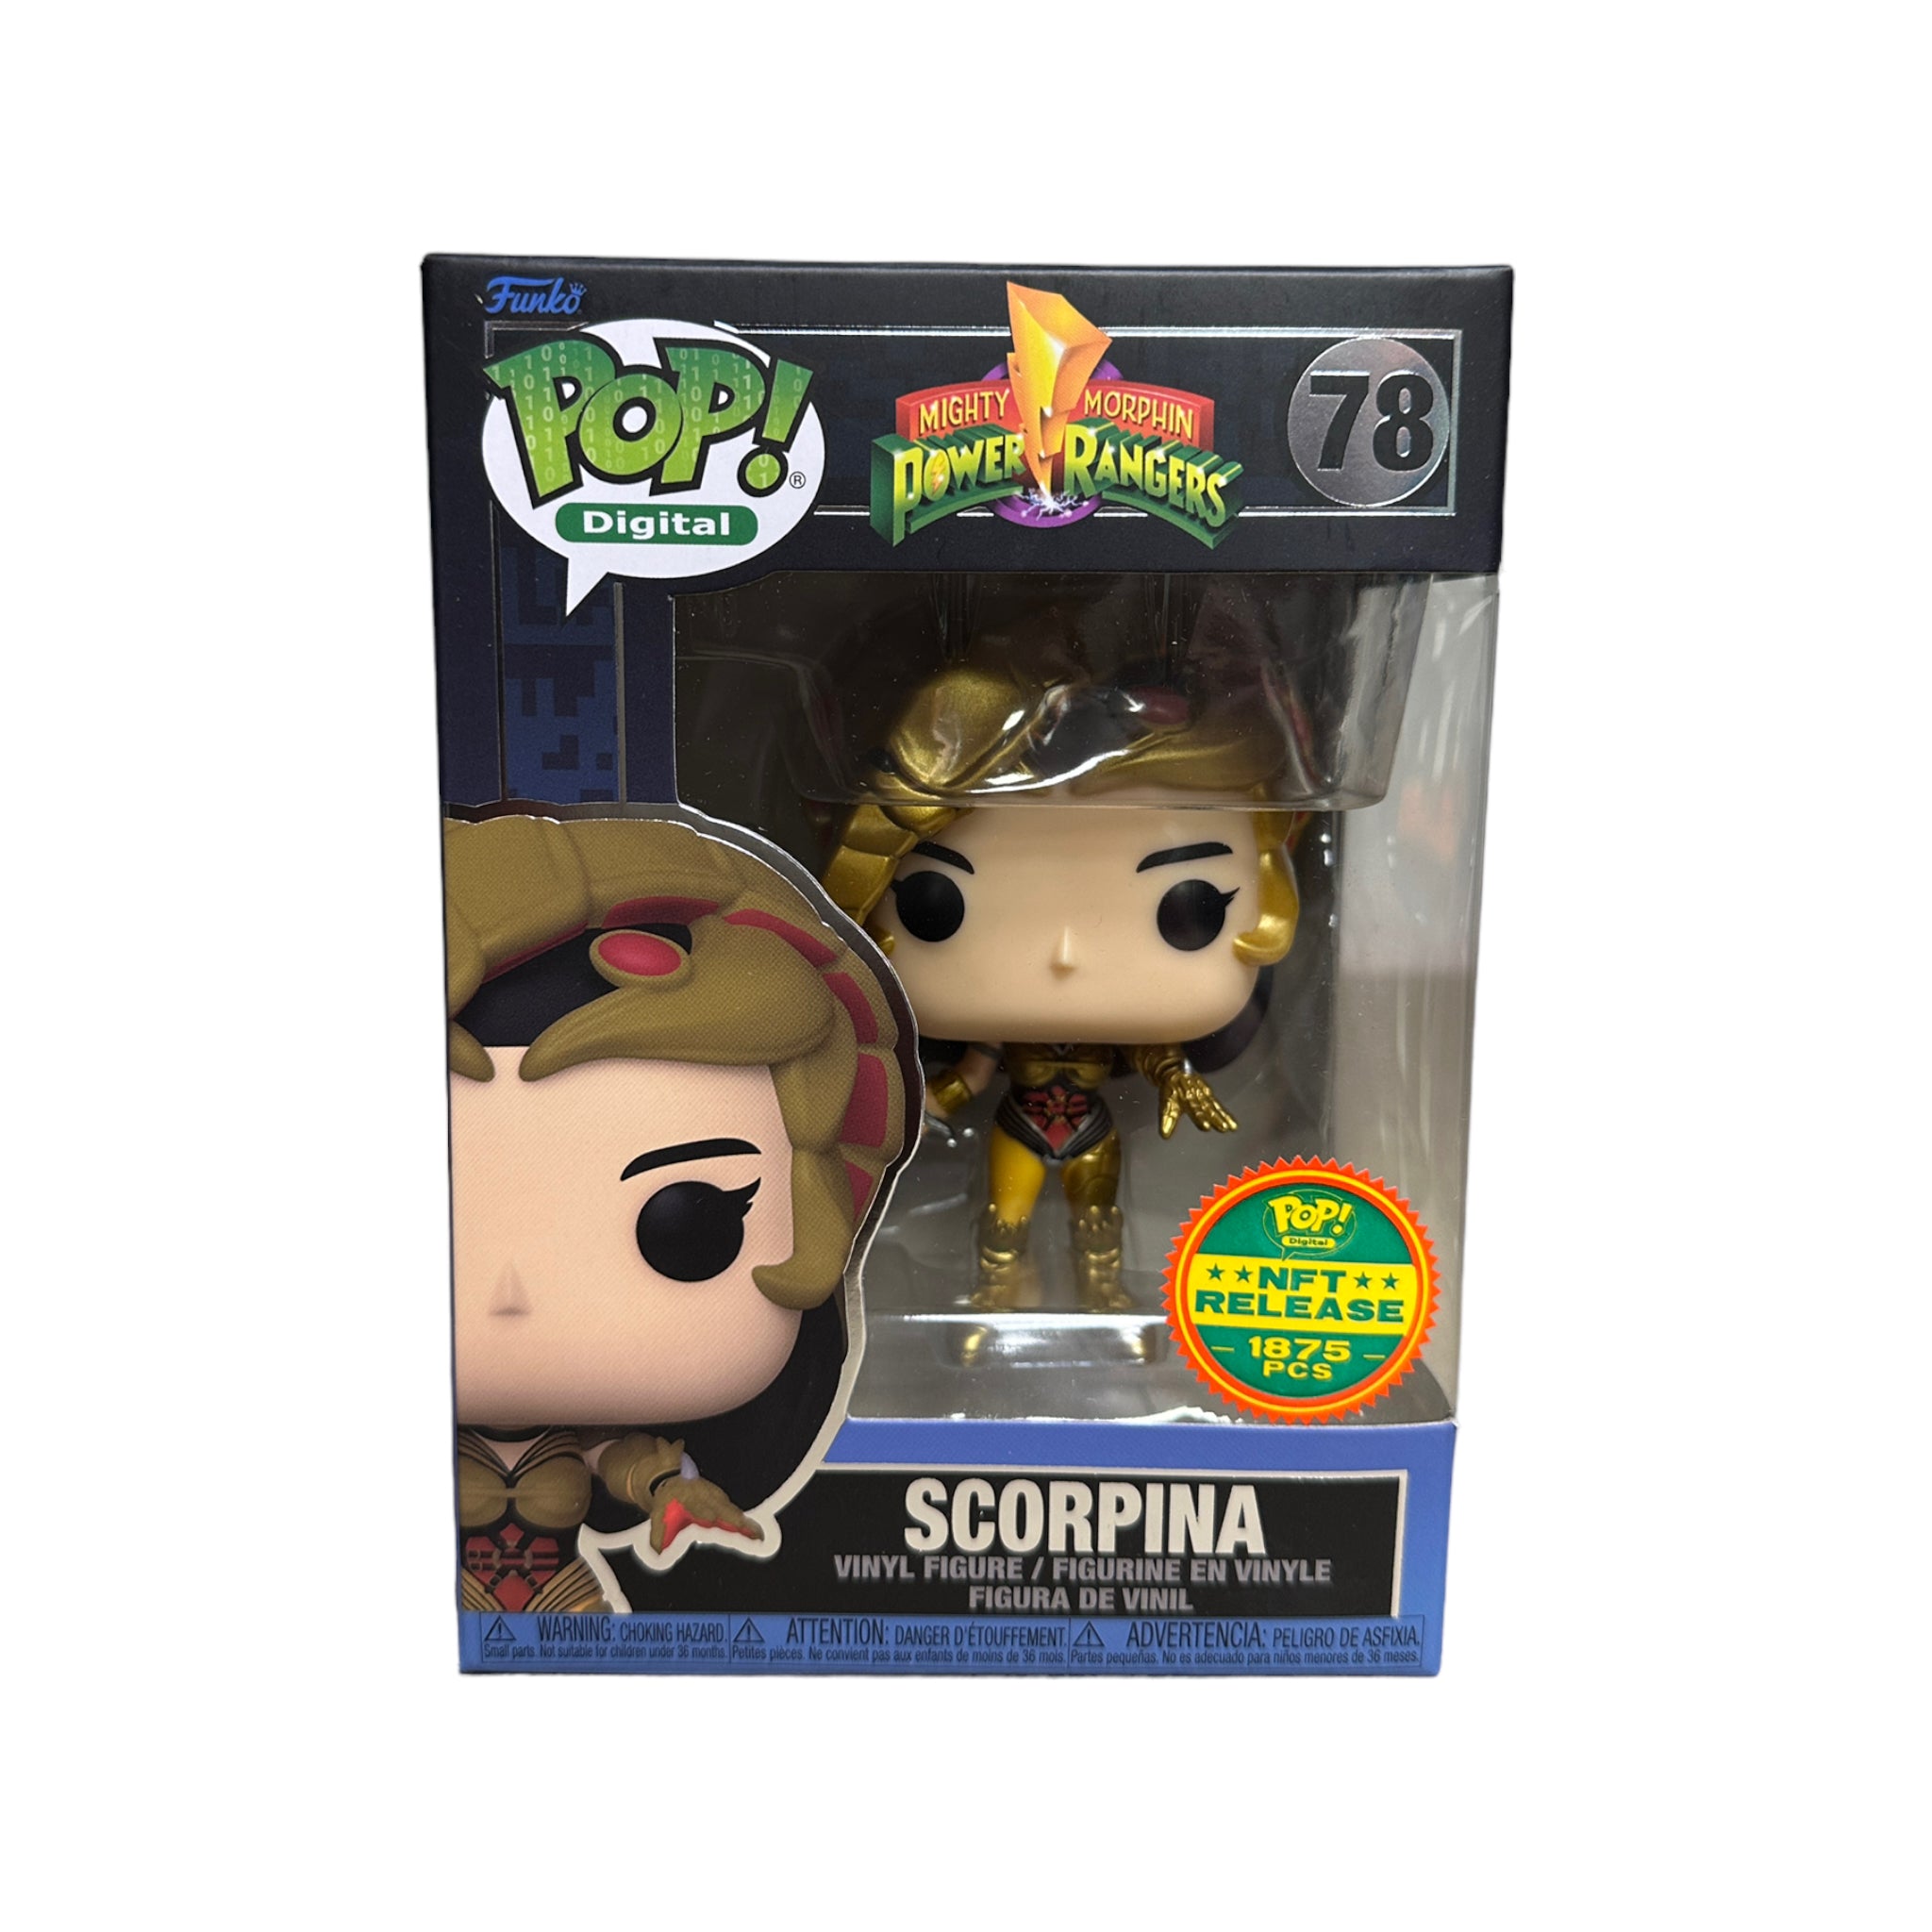 Scorpina #78 Funko Pop! - Mighty Morphin Power Rangers - NFT Release Exclusive LE1875 Pcs - Condition 9/10